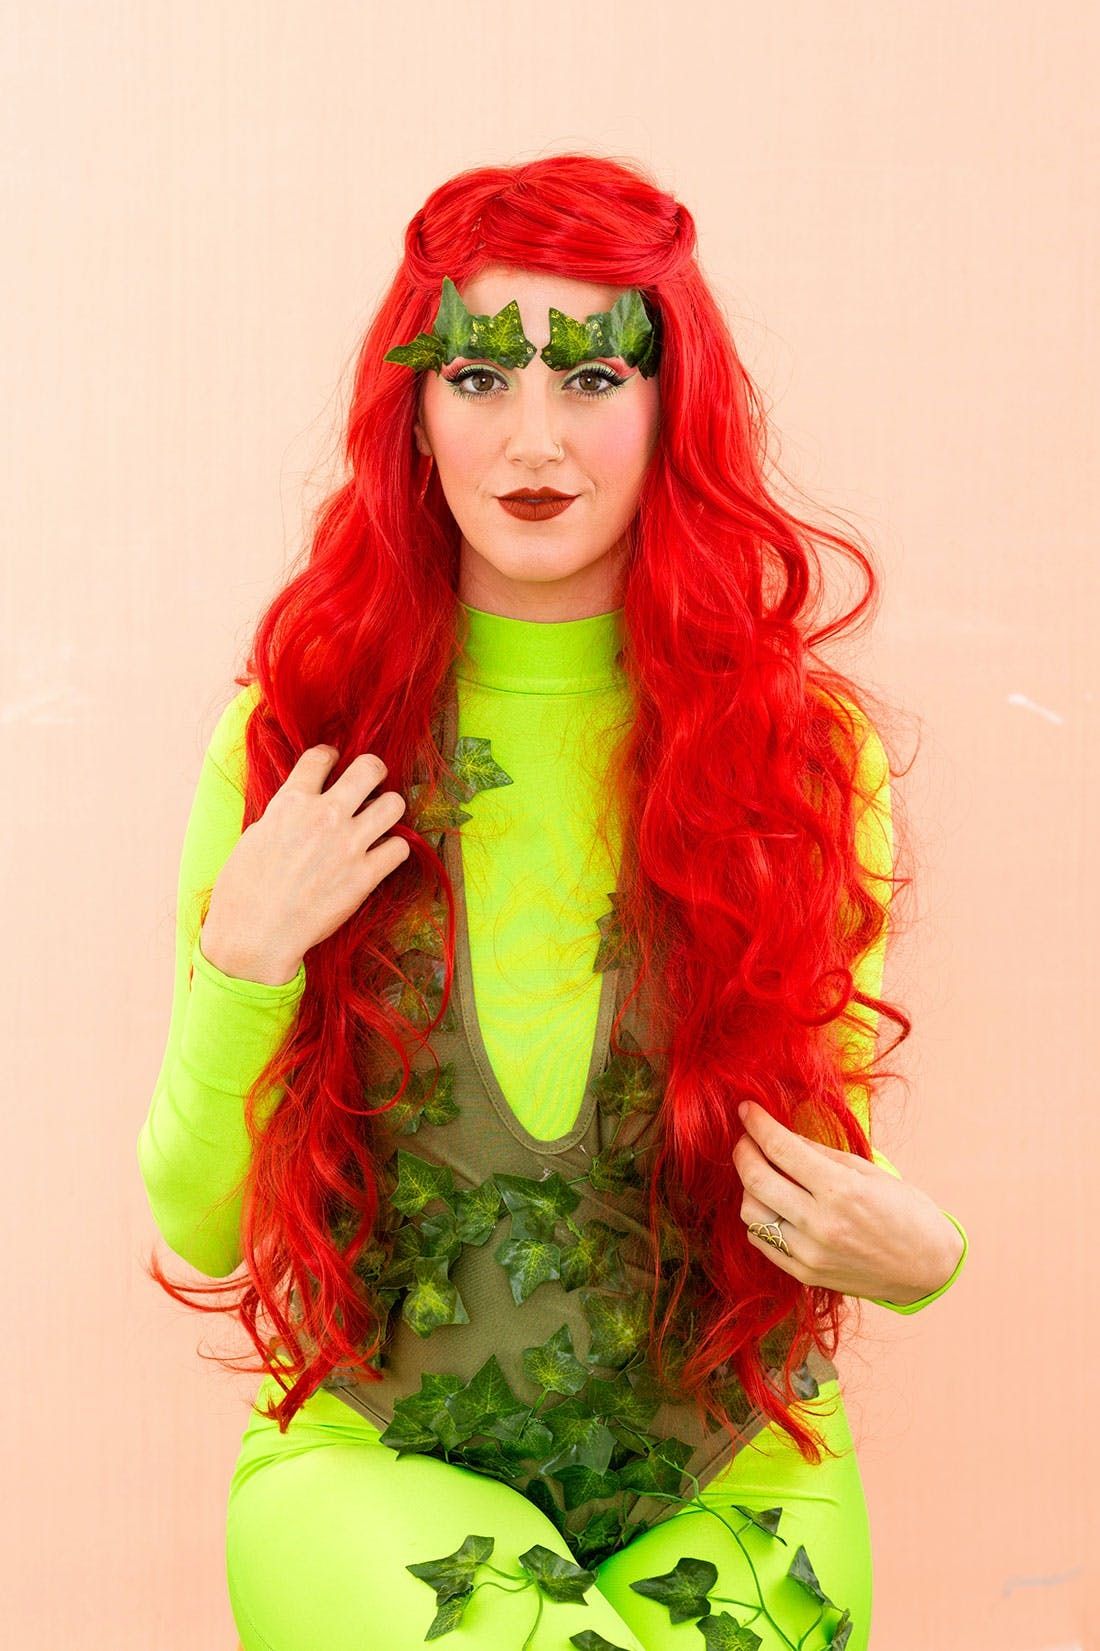 poison ivy character makeup